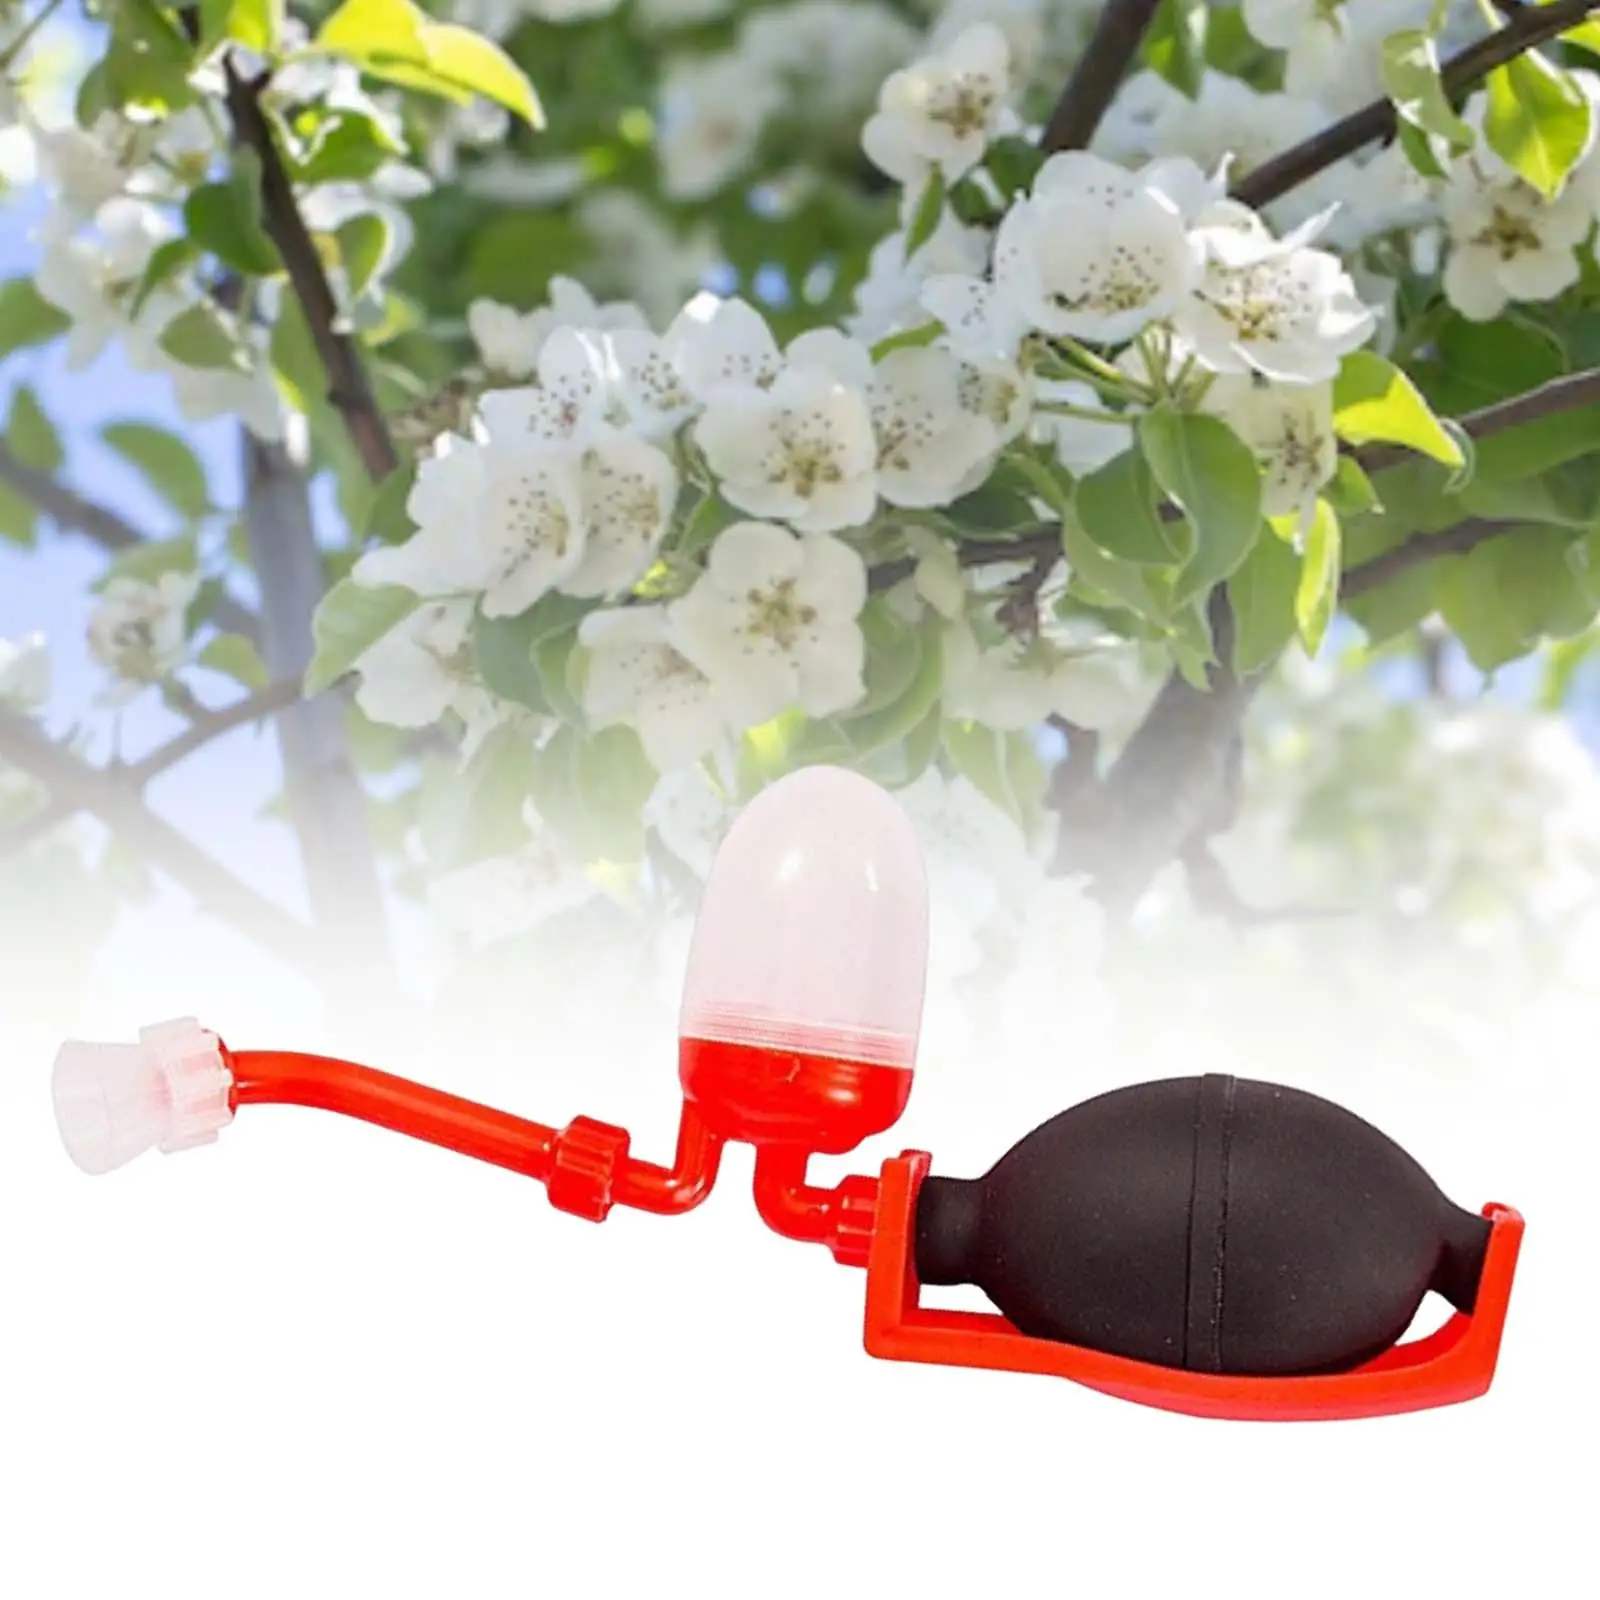 1x Tomato Pollinator Fittings Garden Supply Professional Durable Machine Powder Tool Portable for Plant Outdoor Peach Pear Tree